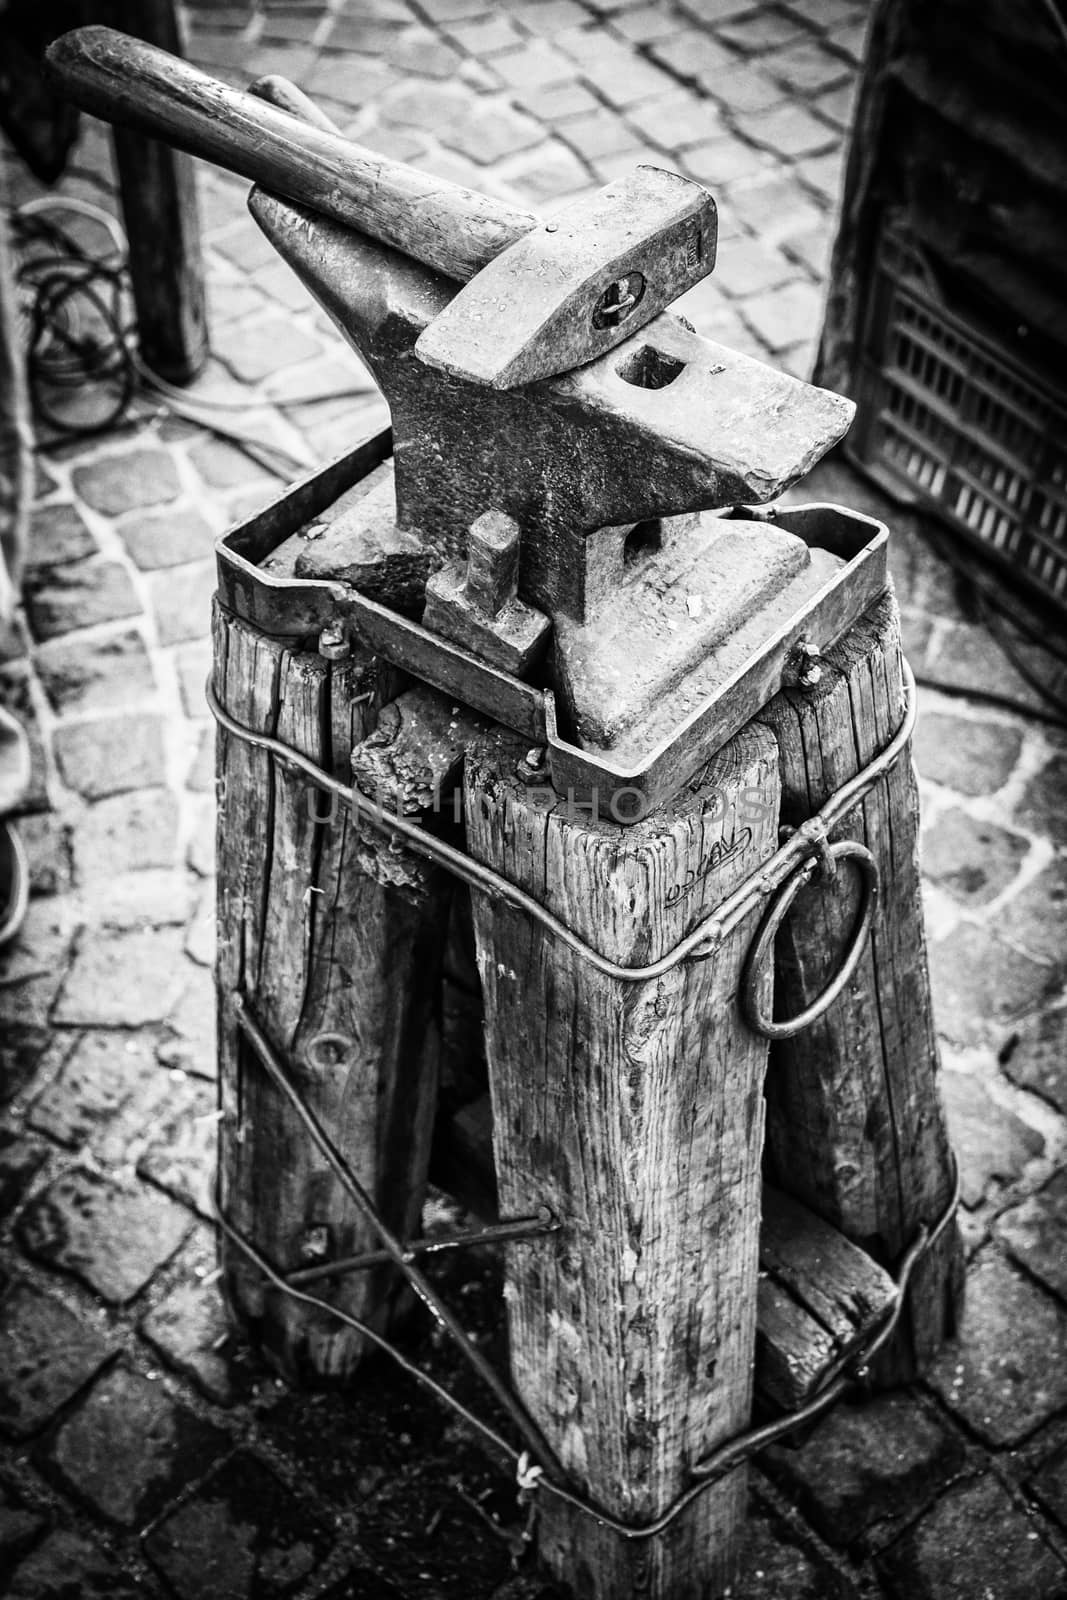 Anvil used by Napoleon's army to shoe horses. by Isaac74